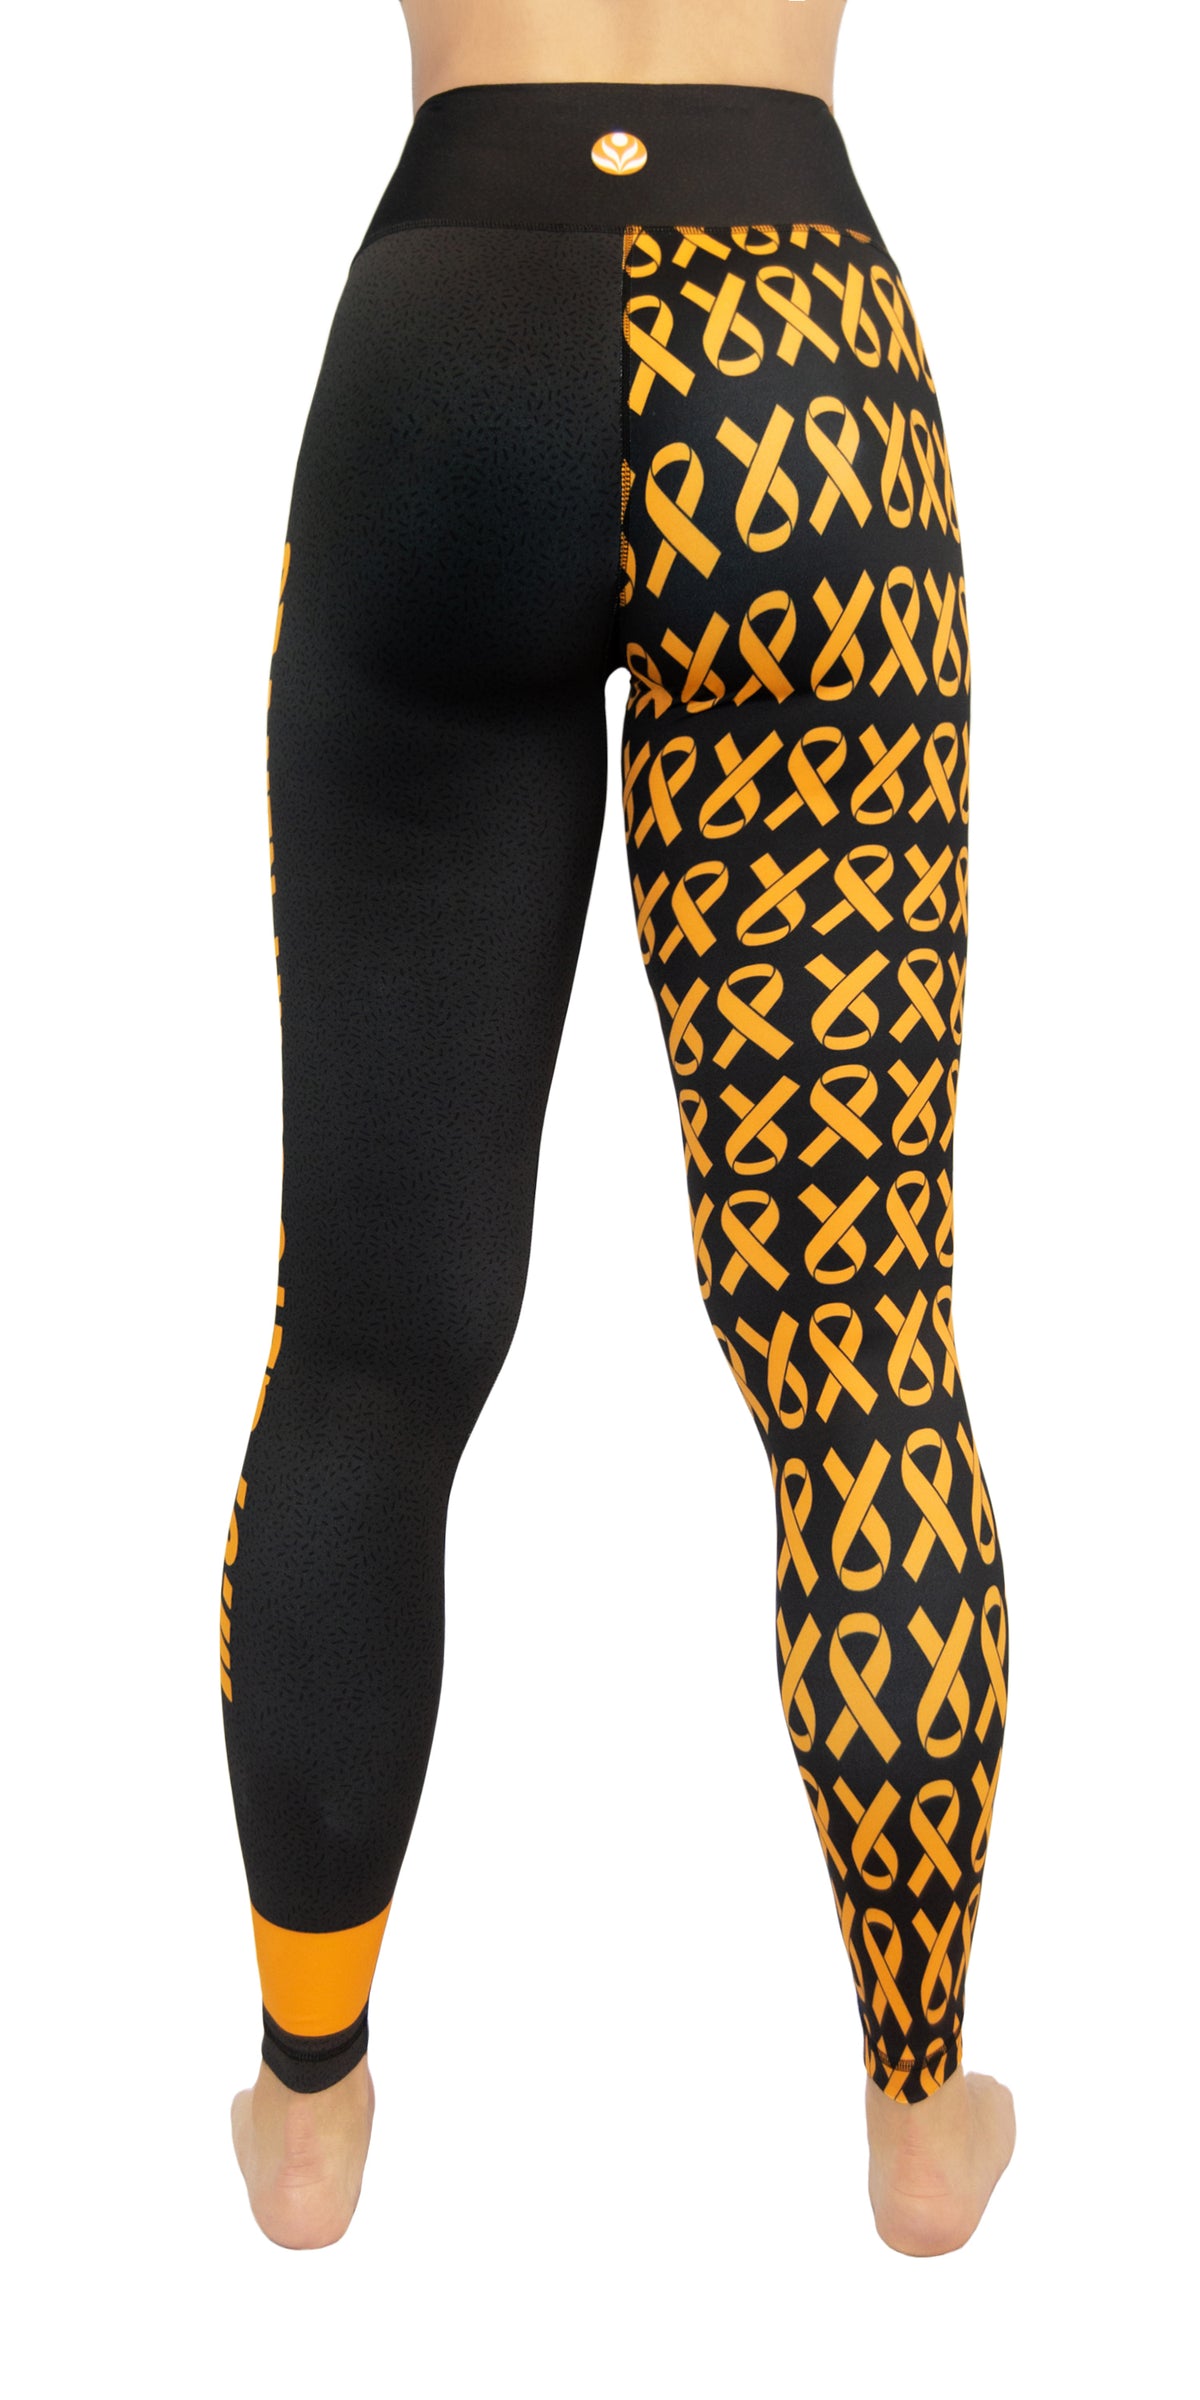 Shop now to find the newest collection of Keep On Movin' (Multiple  Sclerosis) - Legging miamifitwear